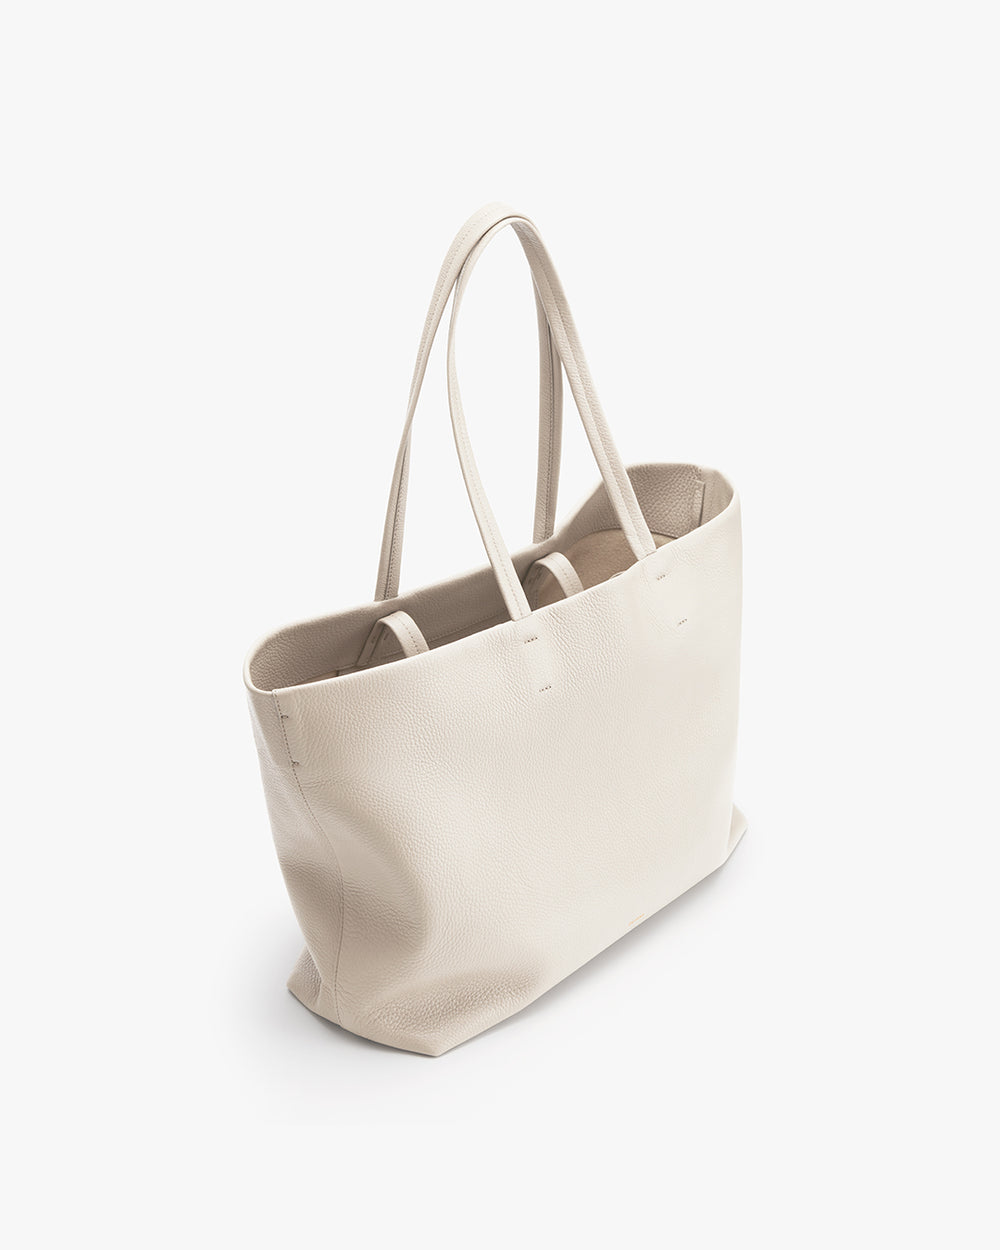 Upright tote bag with two handles on a plain background.